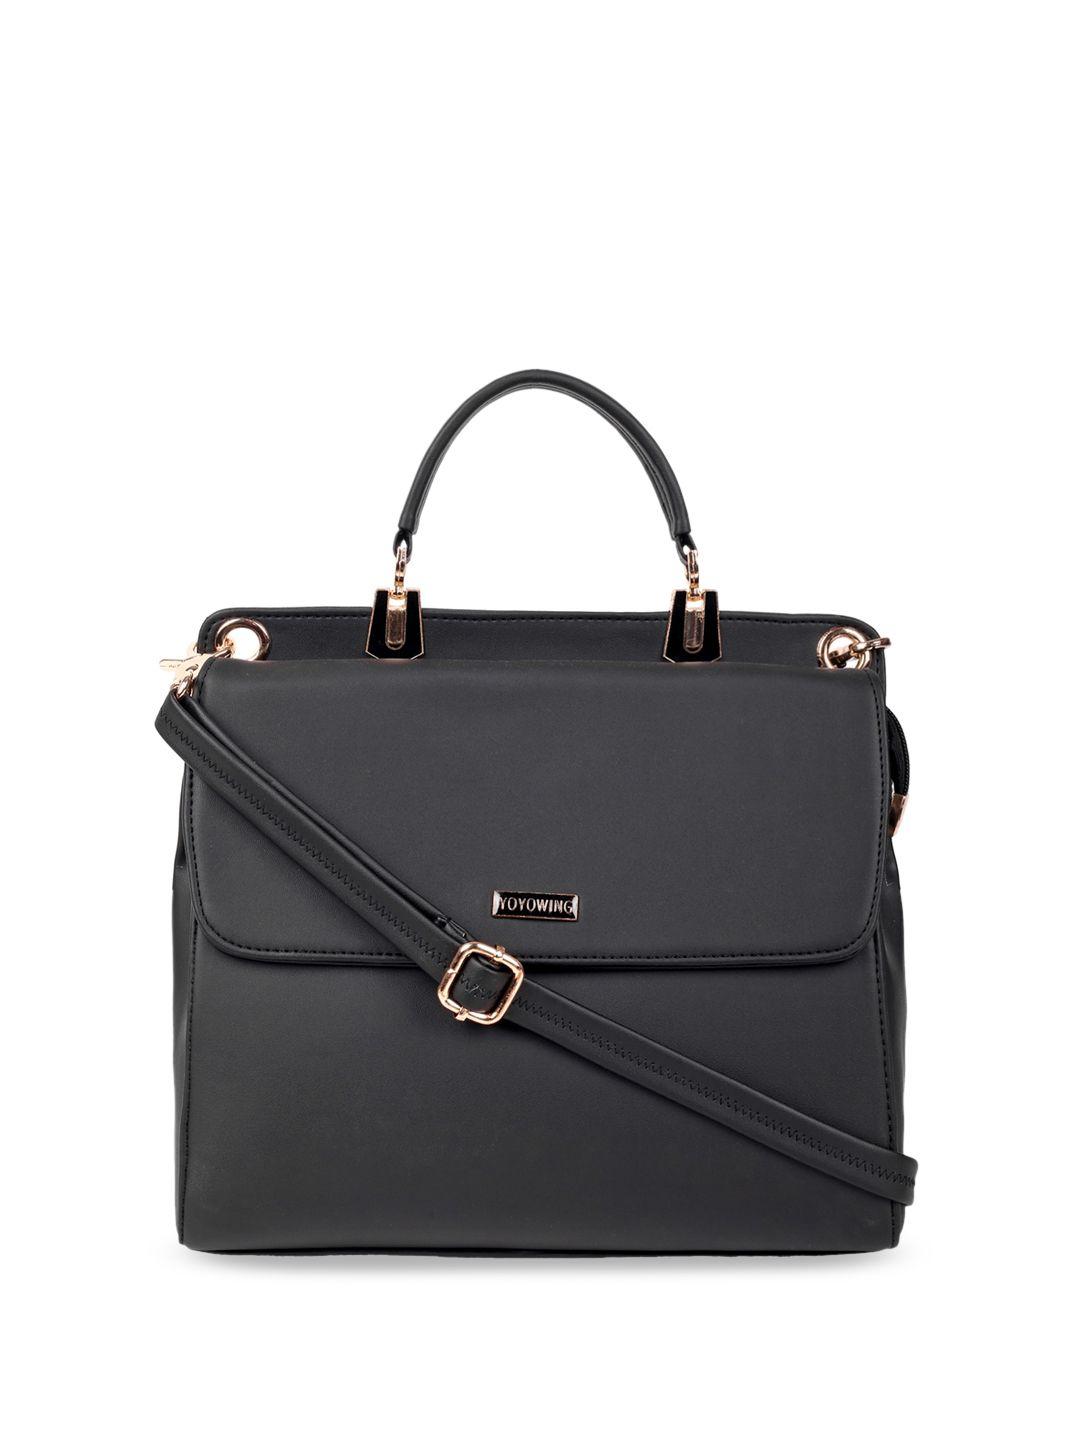 yoyowing structured satchel bag with zip detail